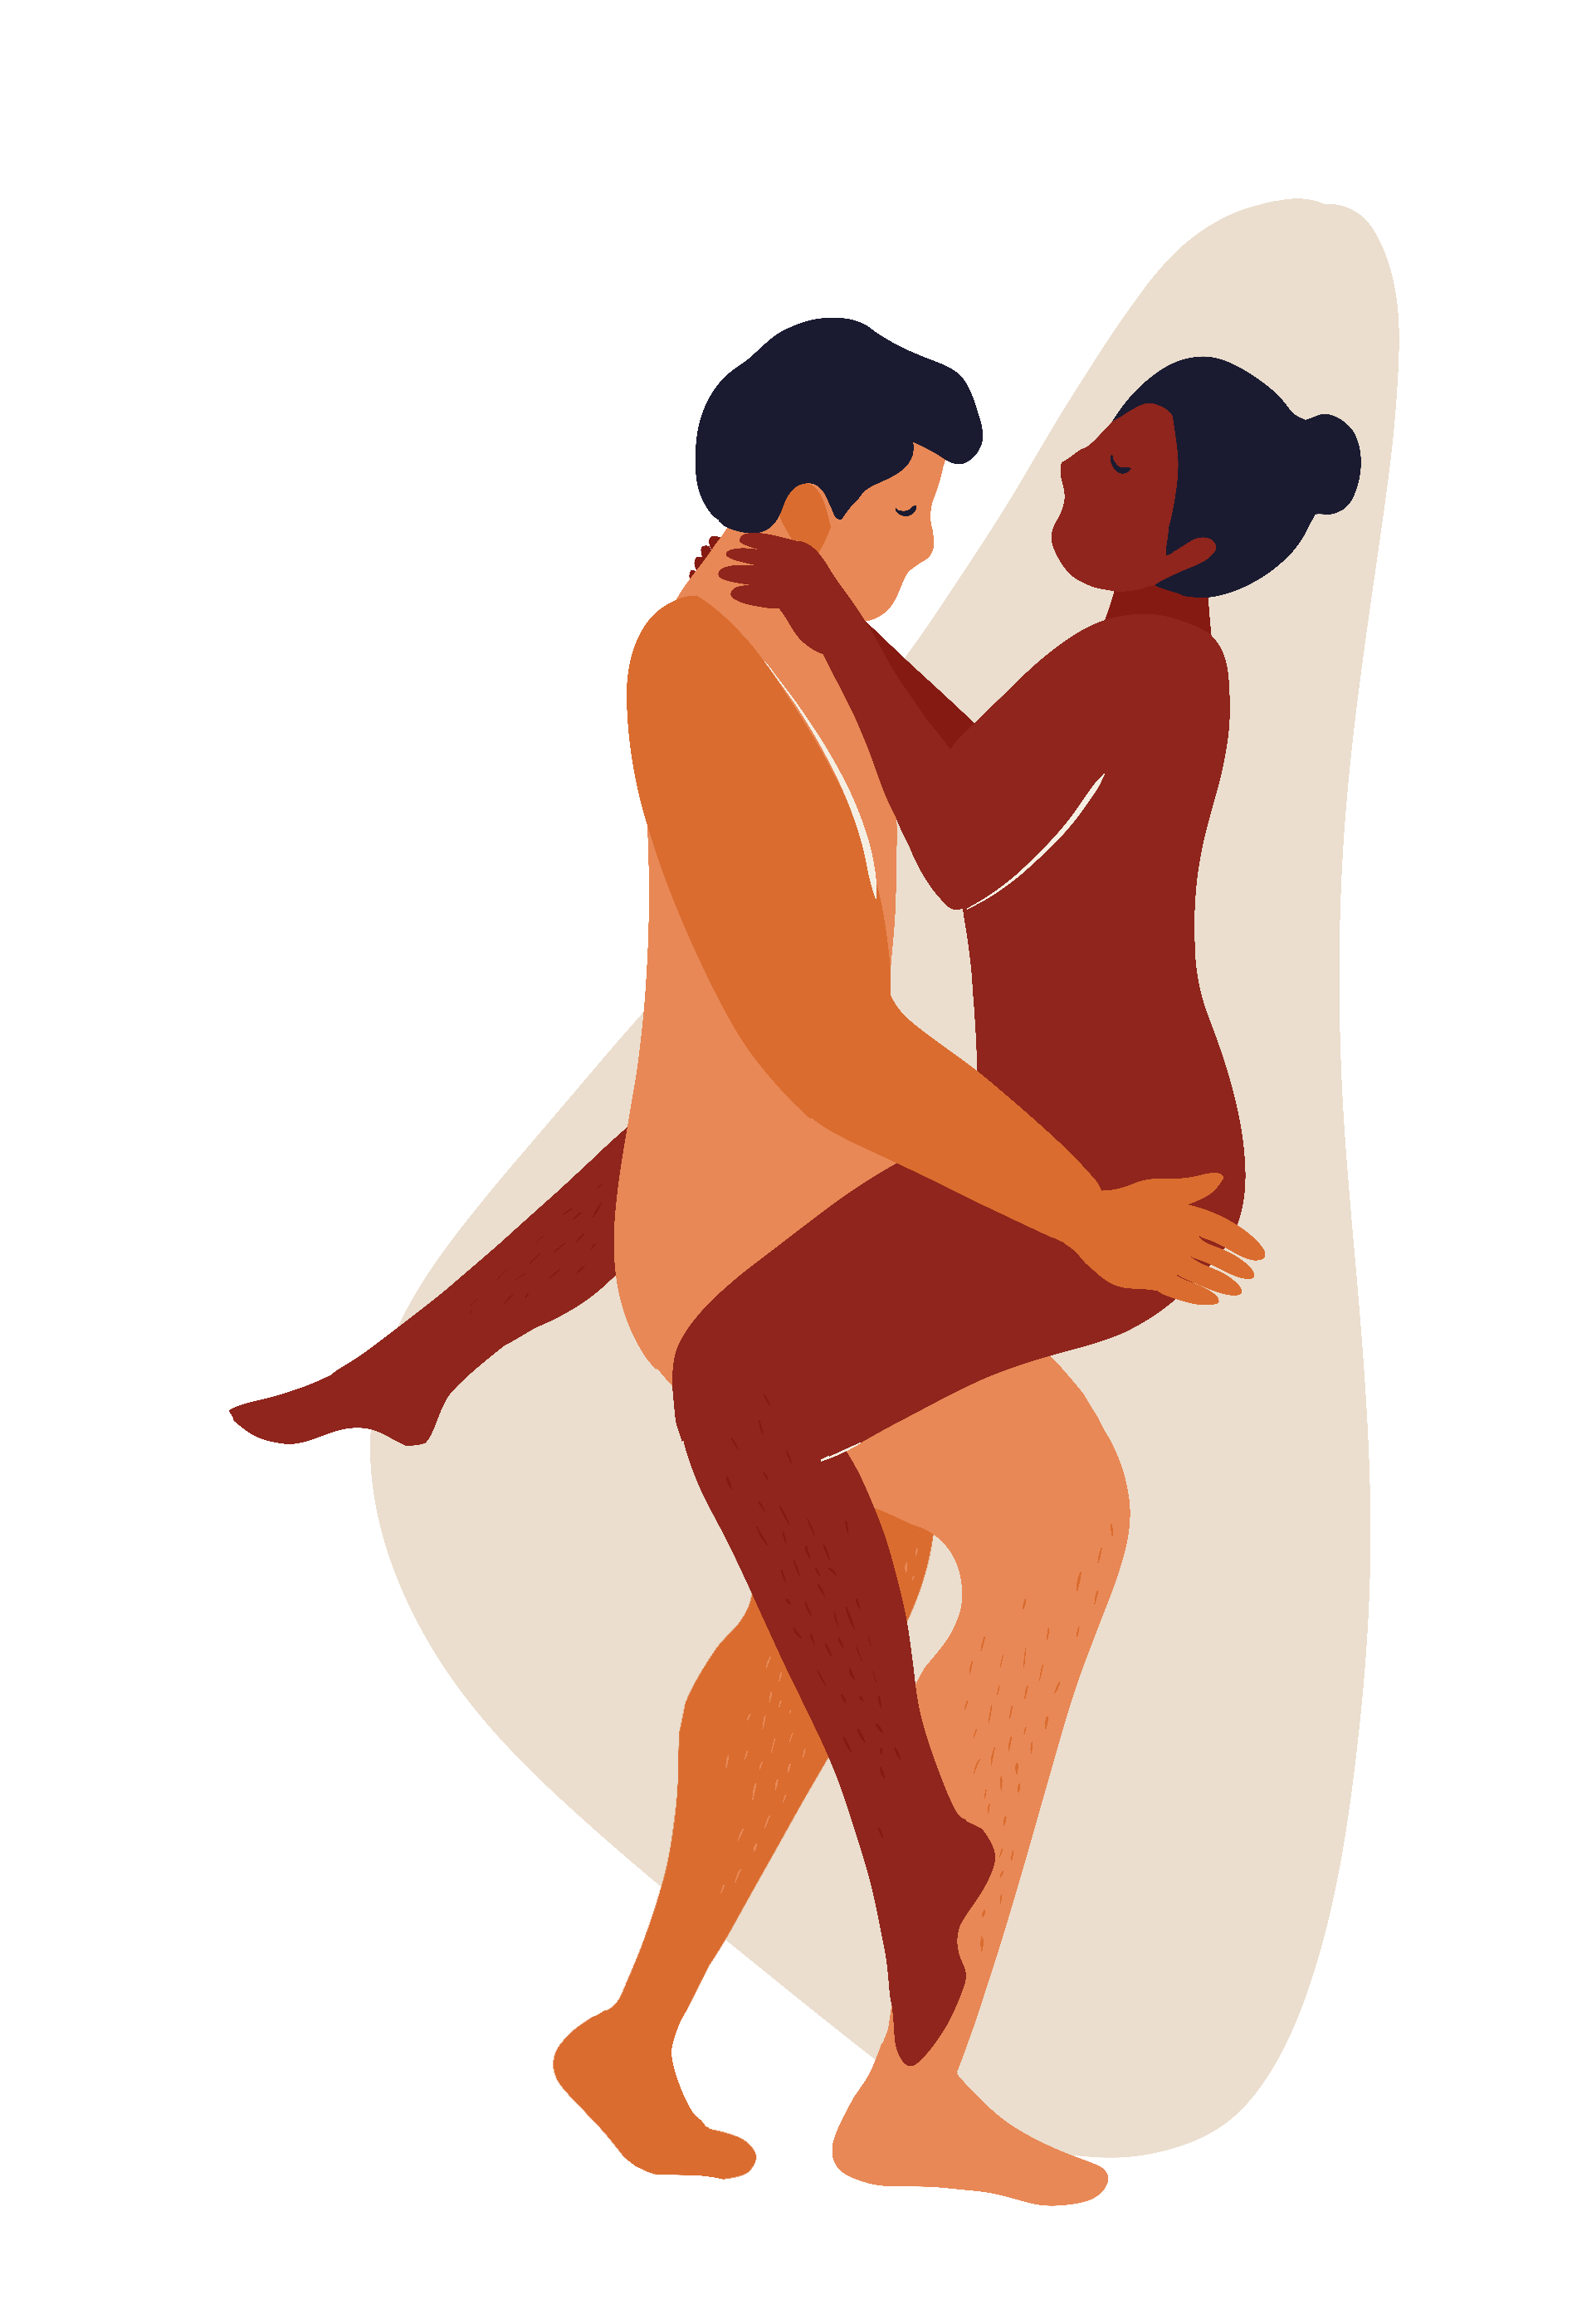 15 Kama Sutra Sex Positions That Couples Can Easily Pull picture photo image